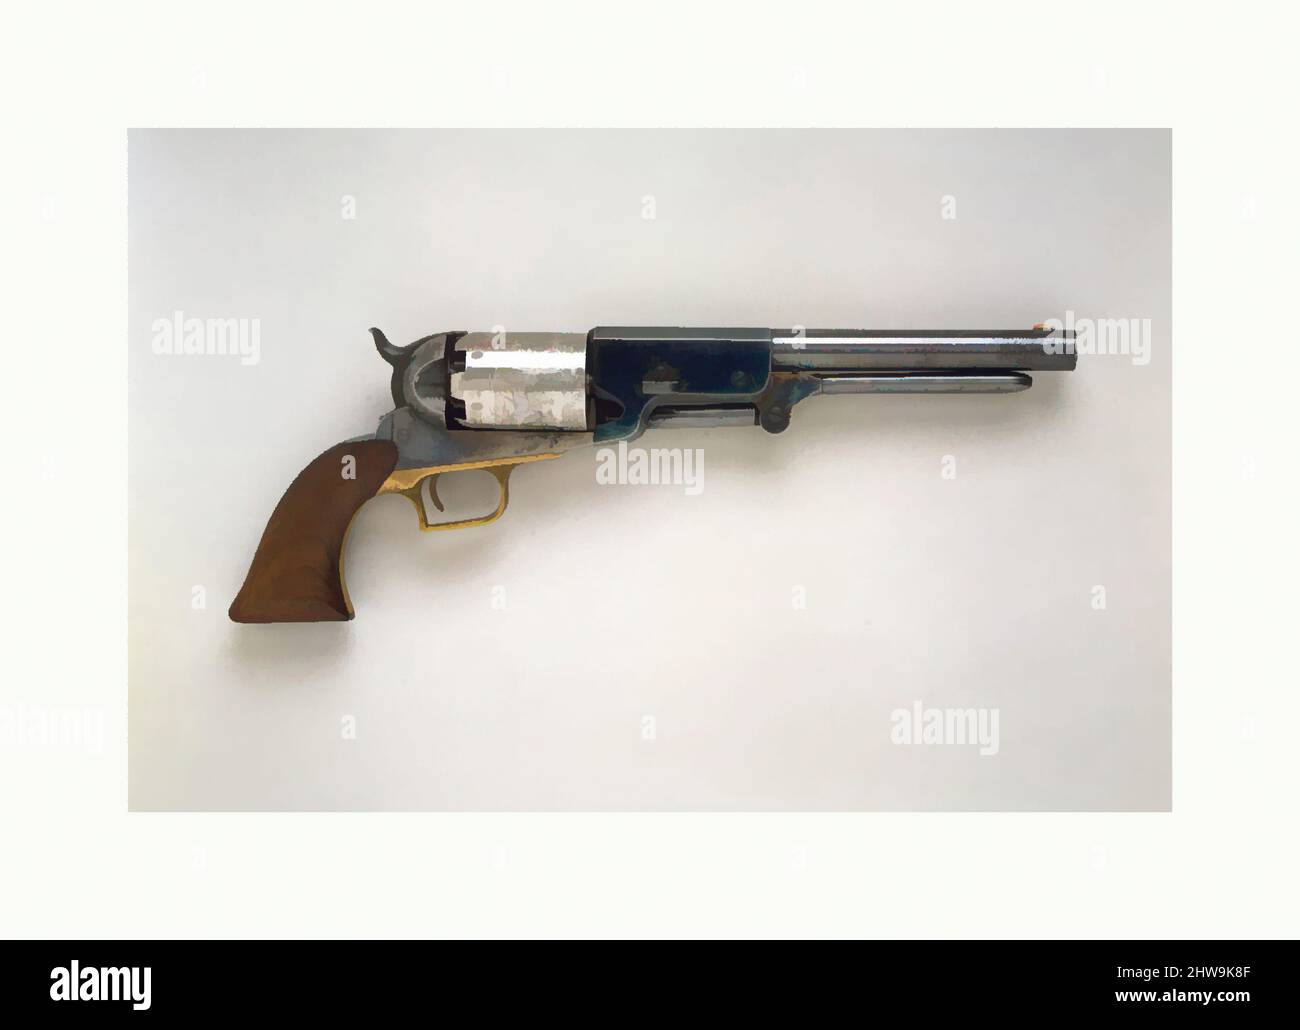 Art inspired by Colt Walker Percussion Revolver, serial no. 1017, 1847, Whitneyville, Connecticut, American, Whitneyville, Connecticut, Steel, brass, wood (walnut), L. 15 1/2 in. (39.37 cm); L. of barrel 9 in. (22.86 cm); Cal. .44 in. (11 mm), Firearms-Pistols-Revolvers, Colt Walkers, Classic works modernized by Artotop with a splash of modernity. Shapes, color and value, eye-catching visual impact on art. Emotions through freedom of artworks in a contemporary way. A timeless message pursuing a wildly creative new direction. Artists turning to the digital medium and creating the Artotop NFT Stock Photo